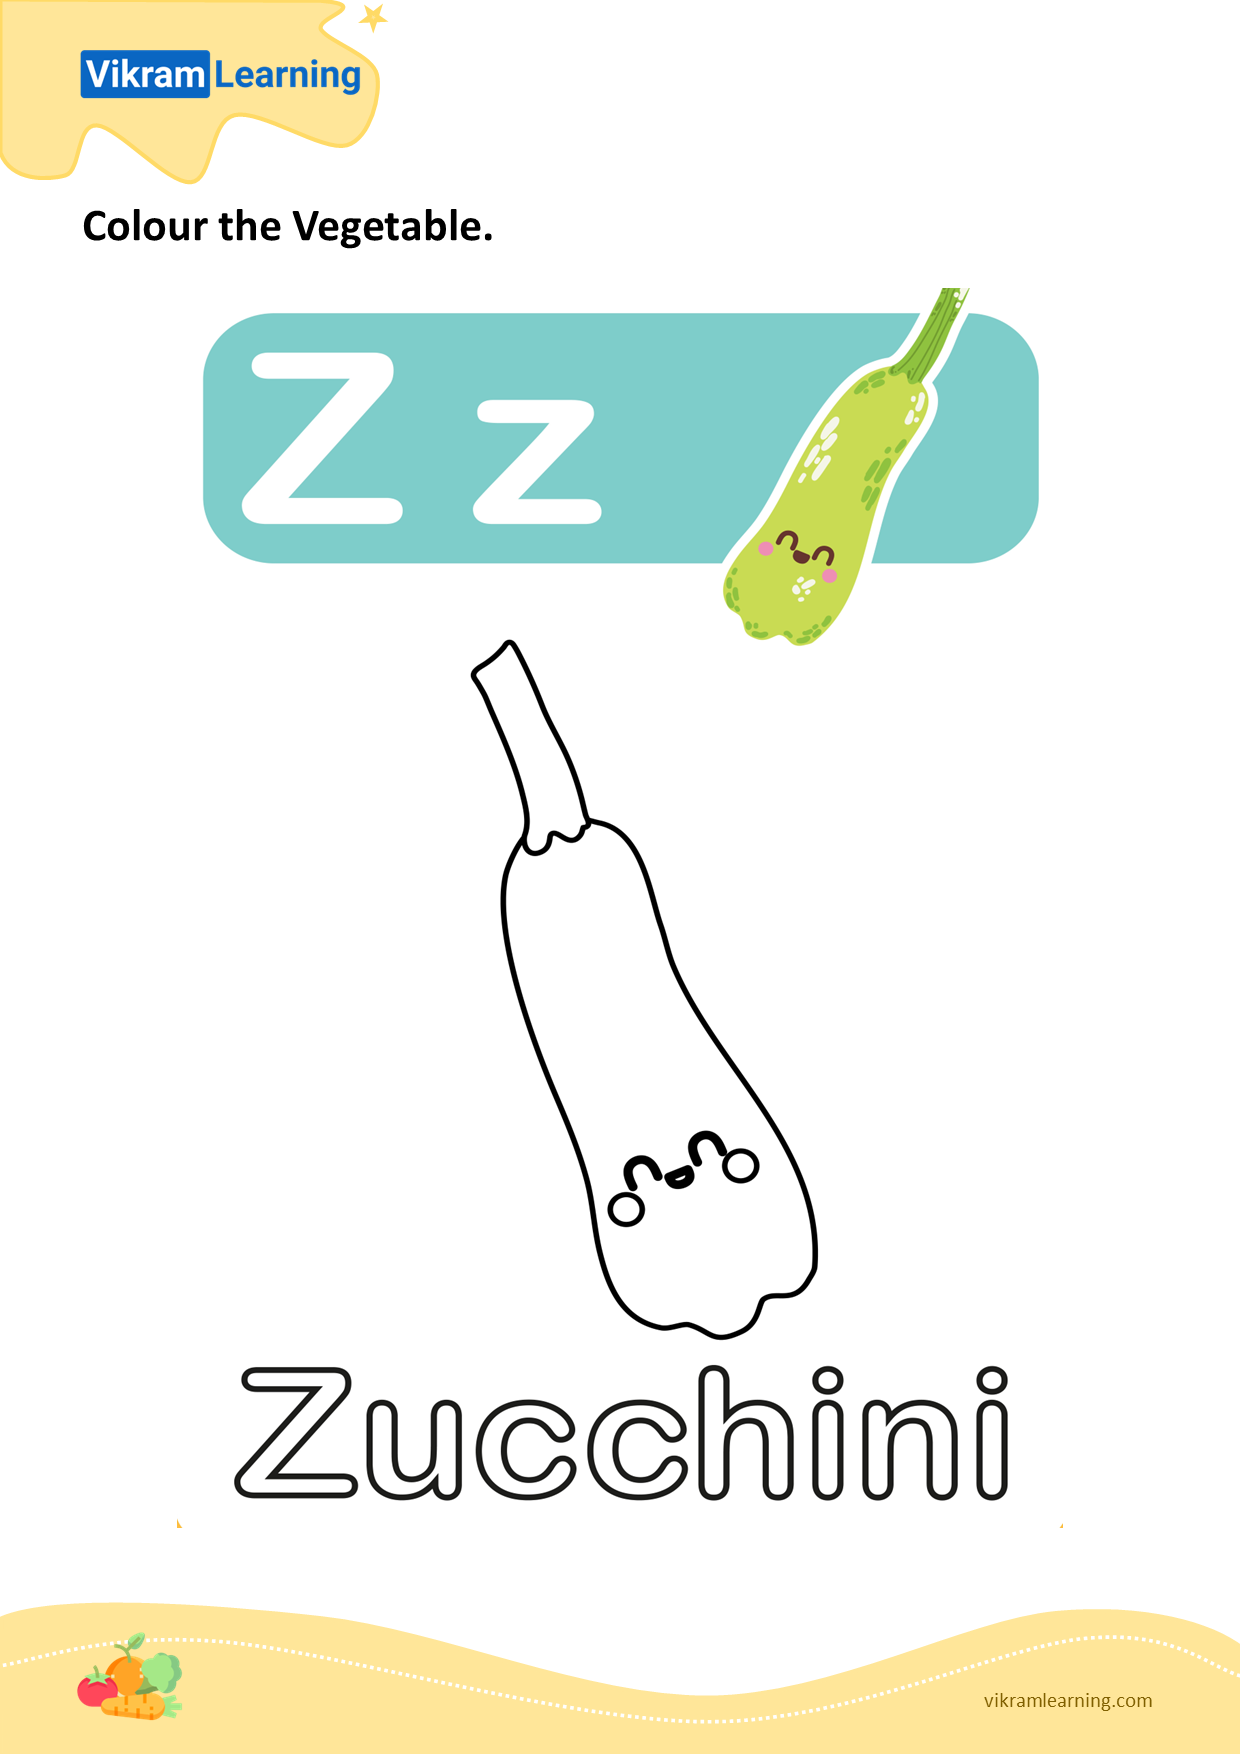 Download colour the vegetable - zucchini worksheets